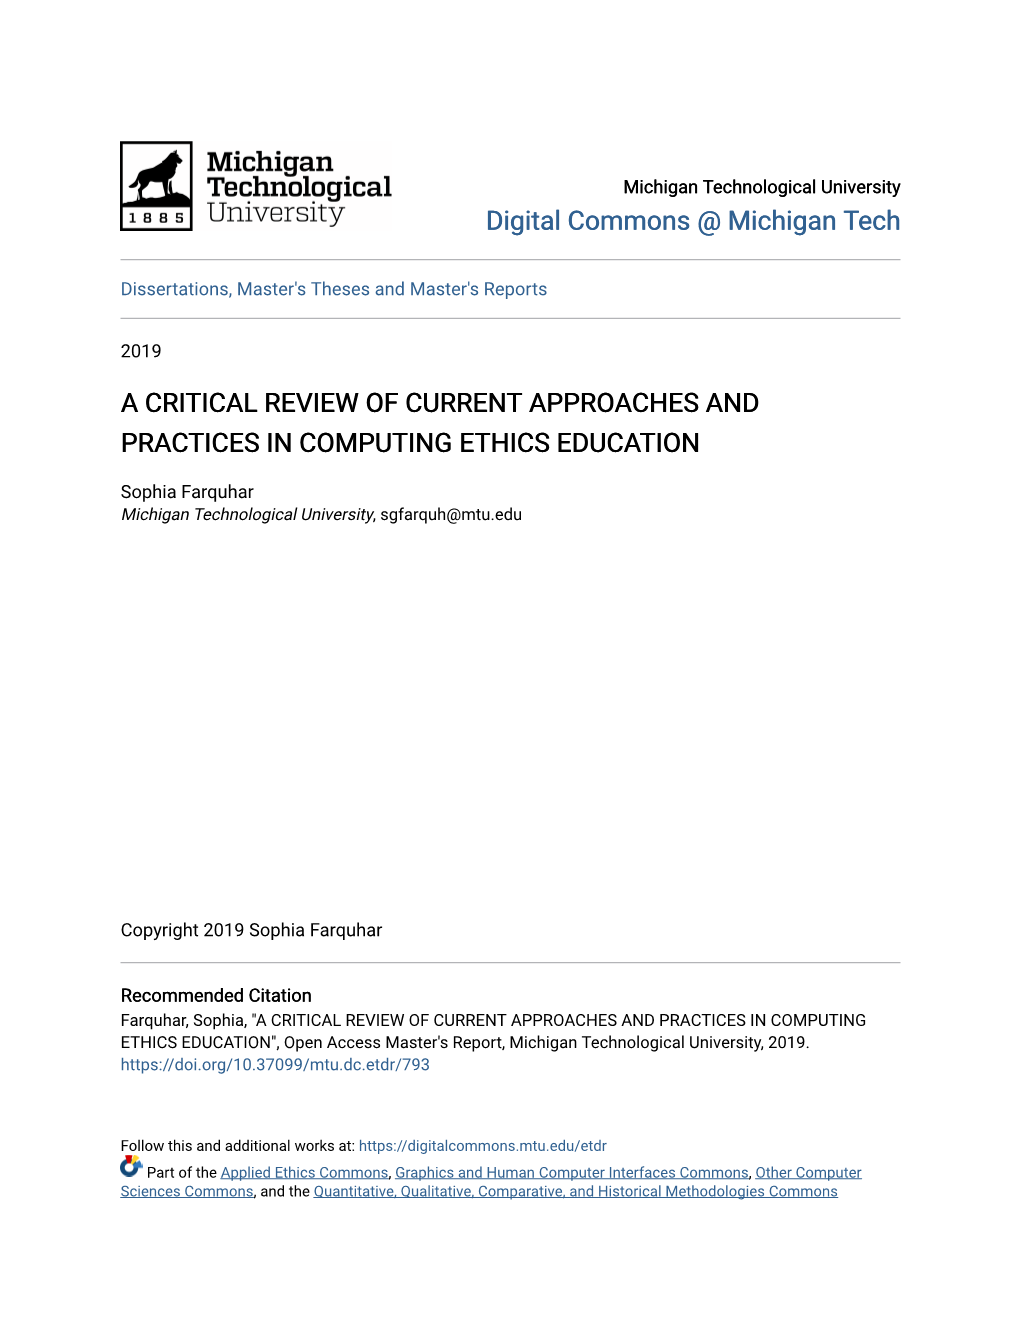 A Critical Review of Current Approaches and Practices in Computing Ethics Education